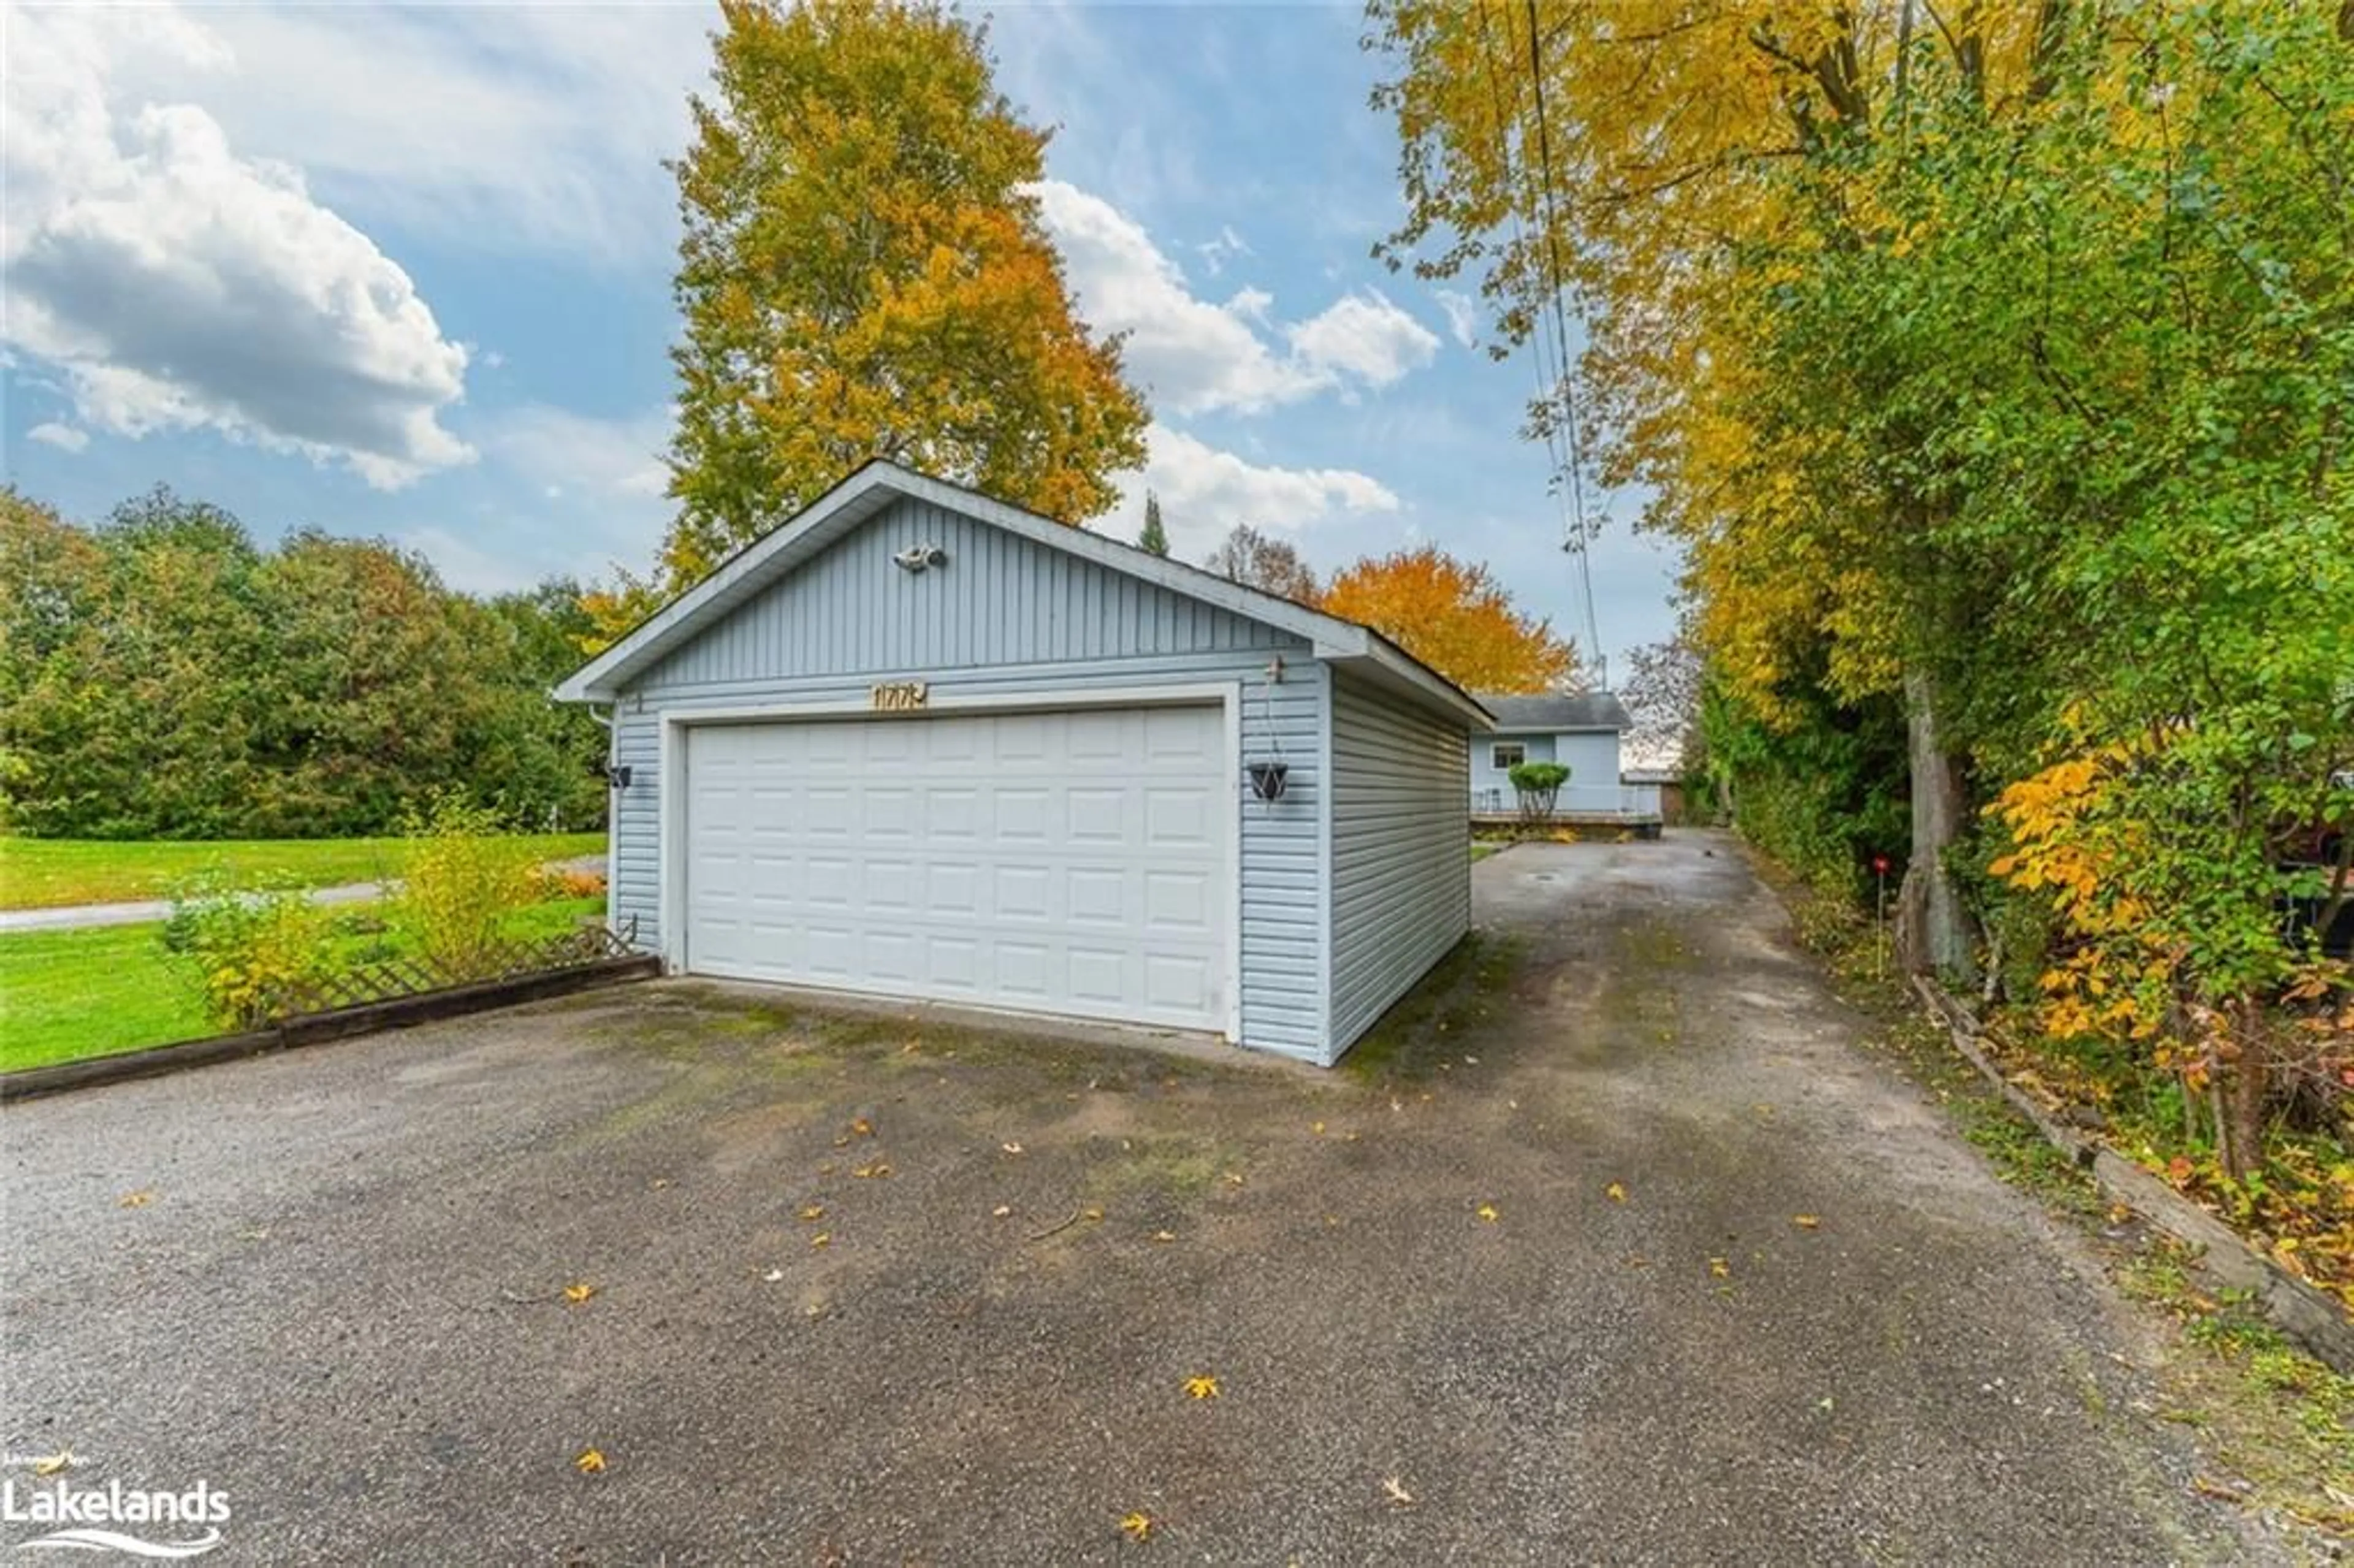 Shed for 177 Beehive Dr, Cameron Ontario K0M 1G0